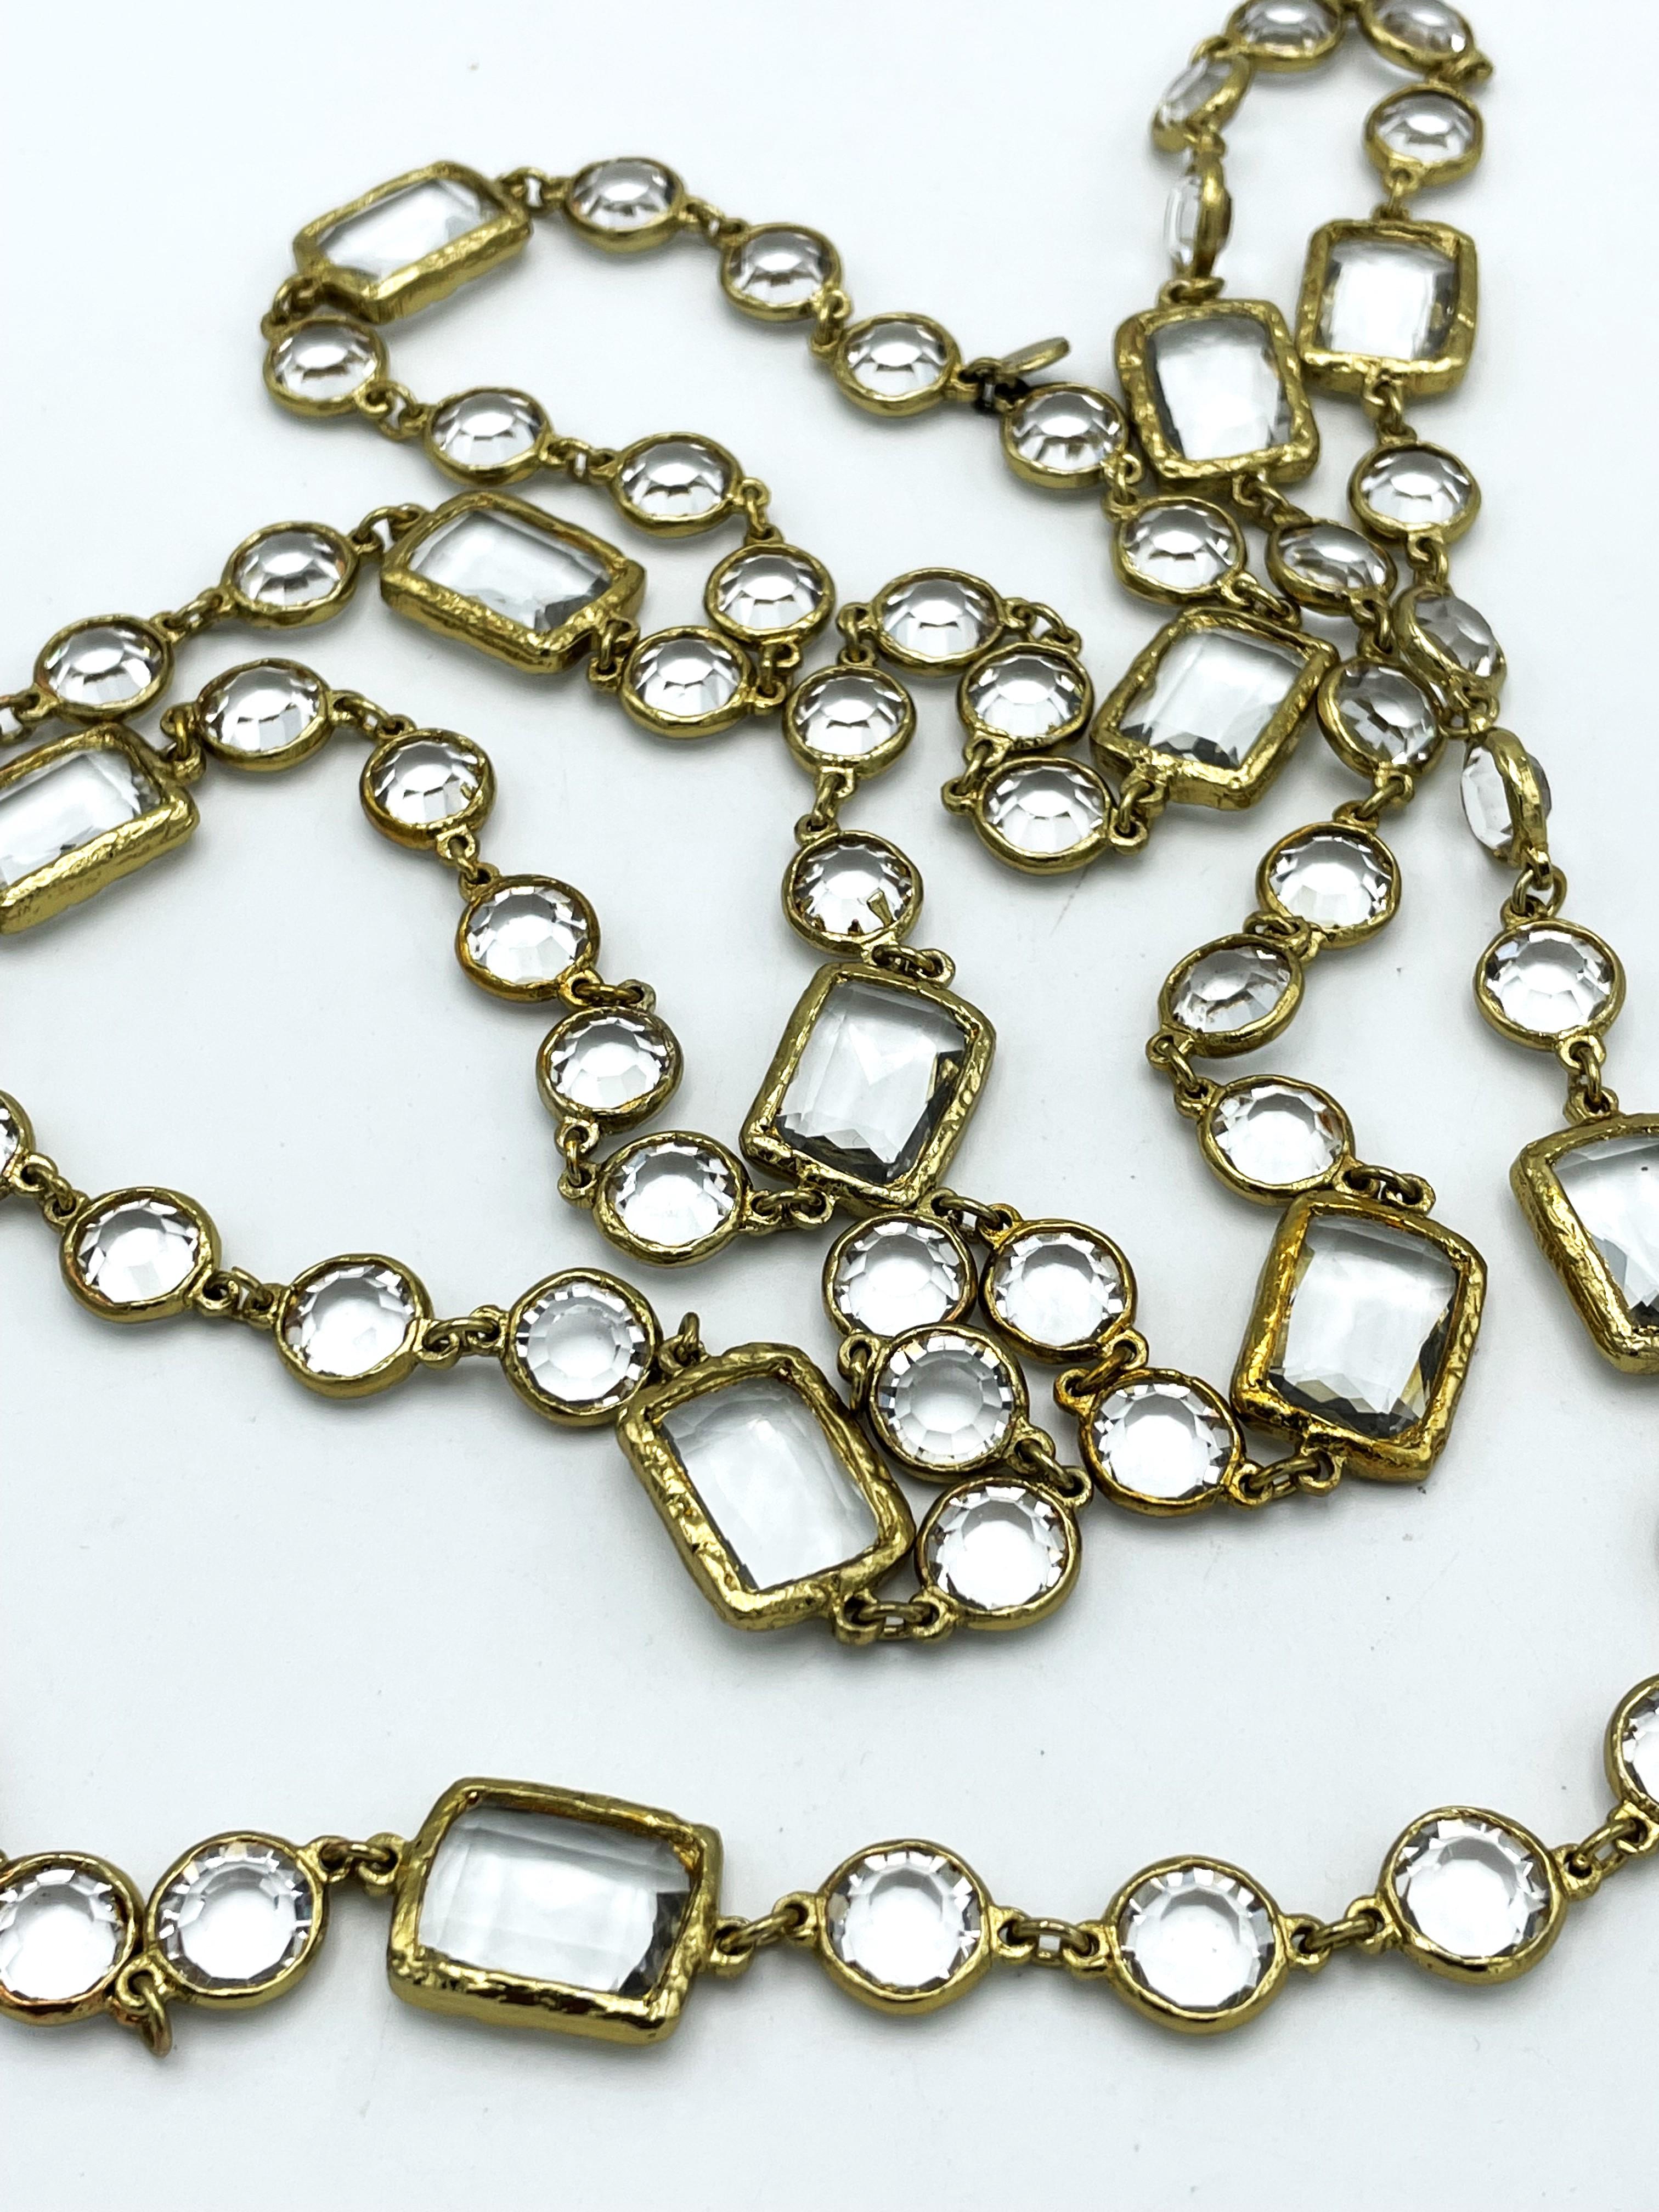 Vintage CHANEL Necklace/Sautoir with 12 clear Chicklets, signed 1981, gold plate 2